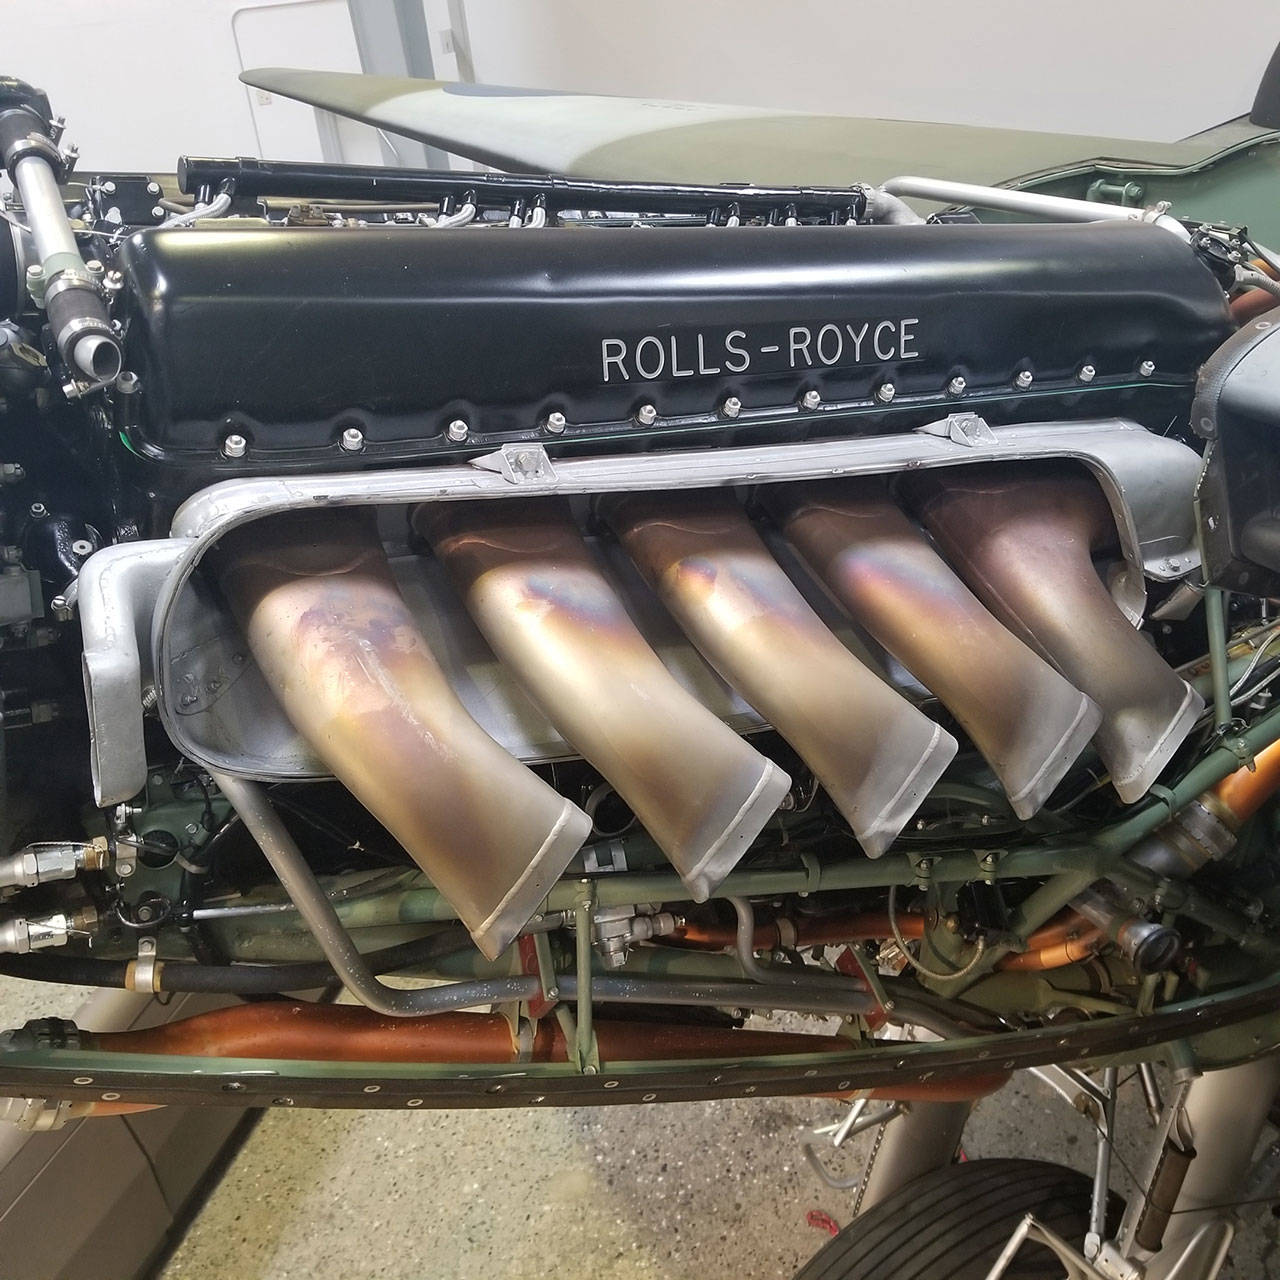 Why a V-12 engine plane has an odd number of exhaust stacks